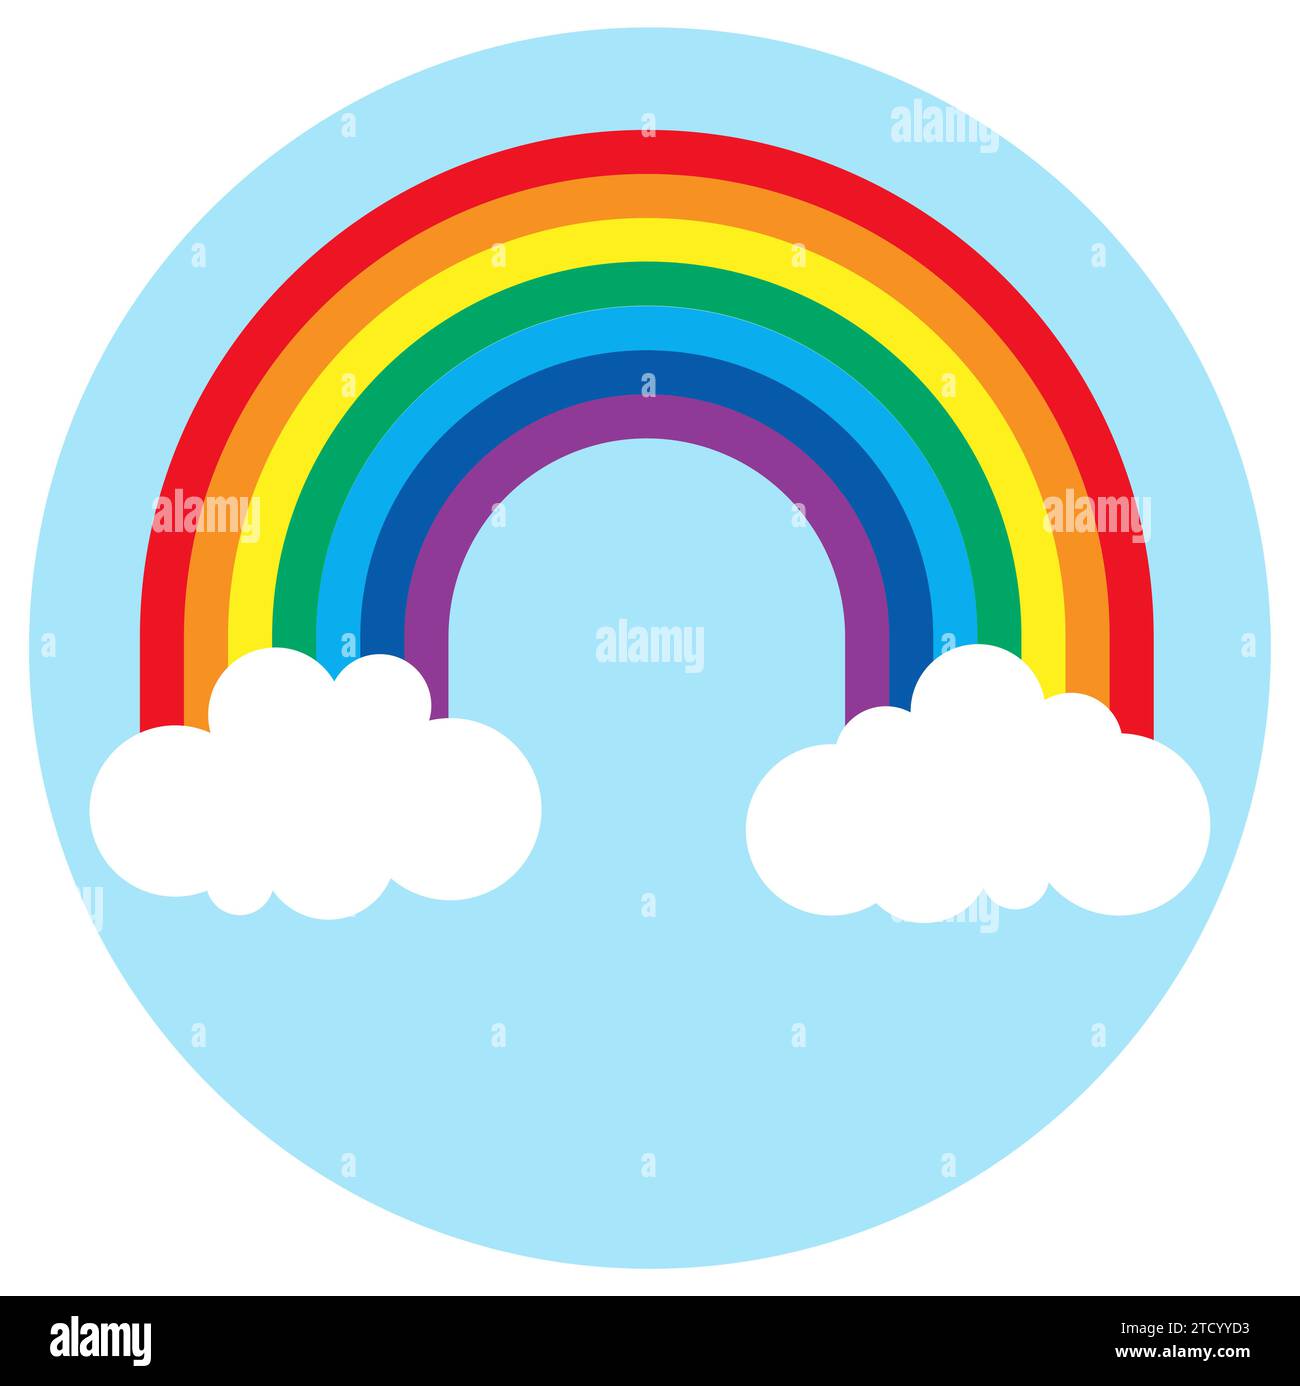 eps vector illustration showing wonderful colored rainbow with white clouds at the ends and round blue background Stock Vector